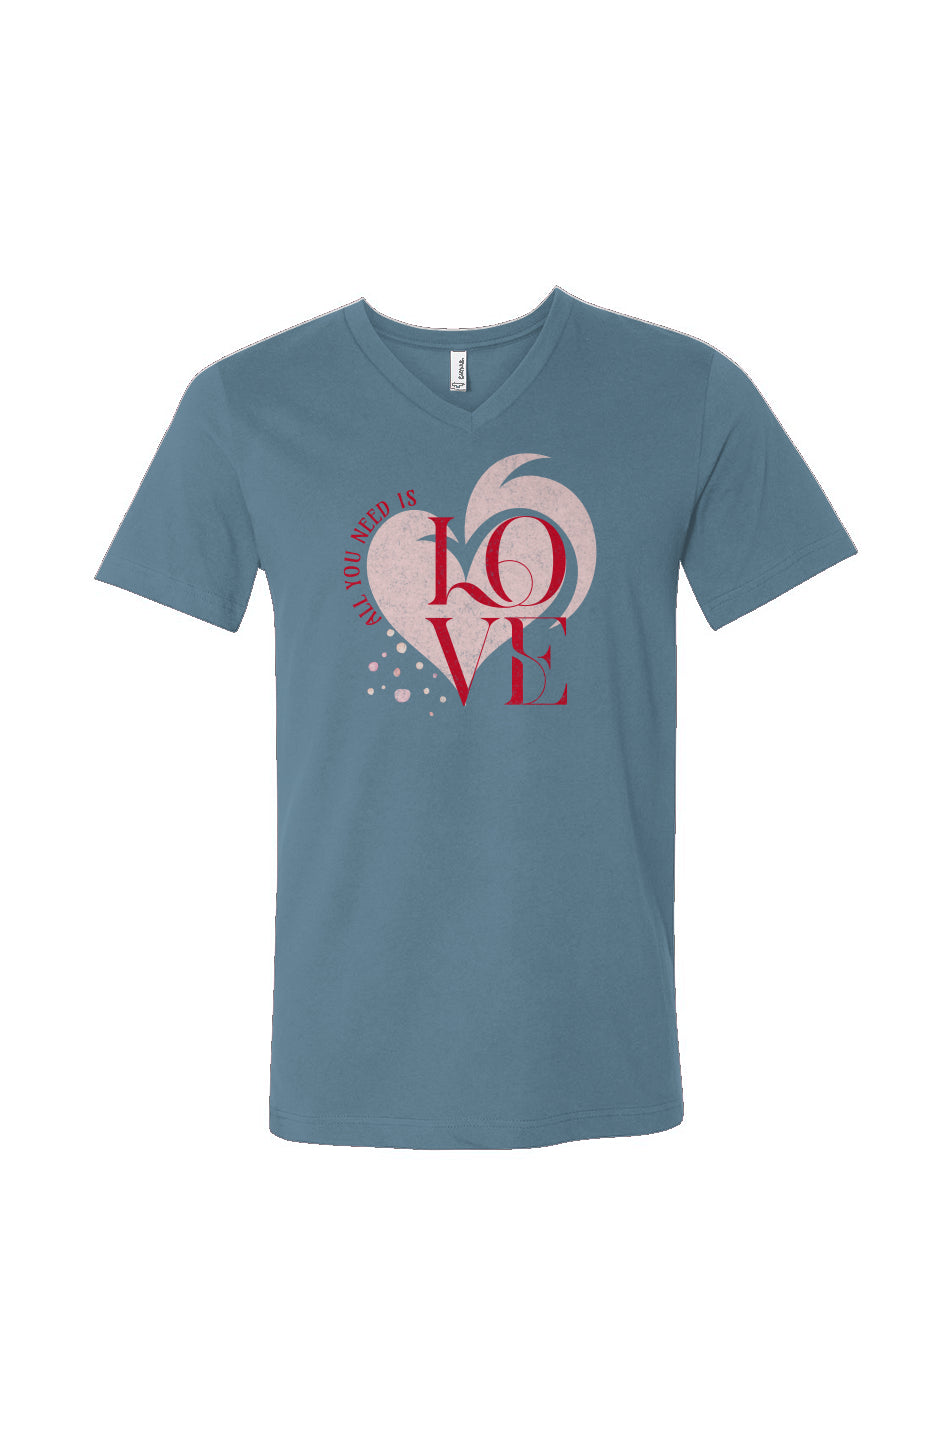 "All you need is Love" V-neck 